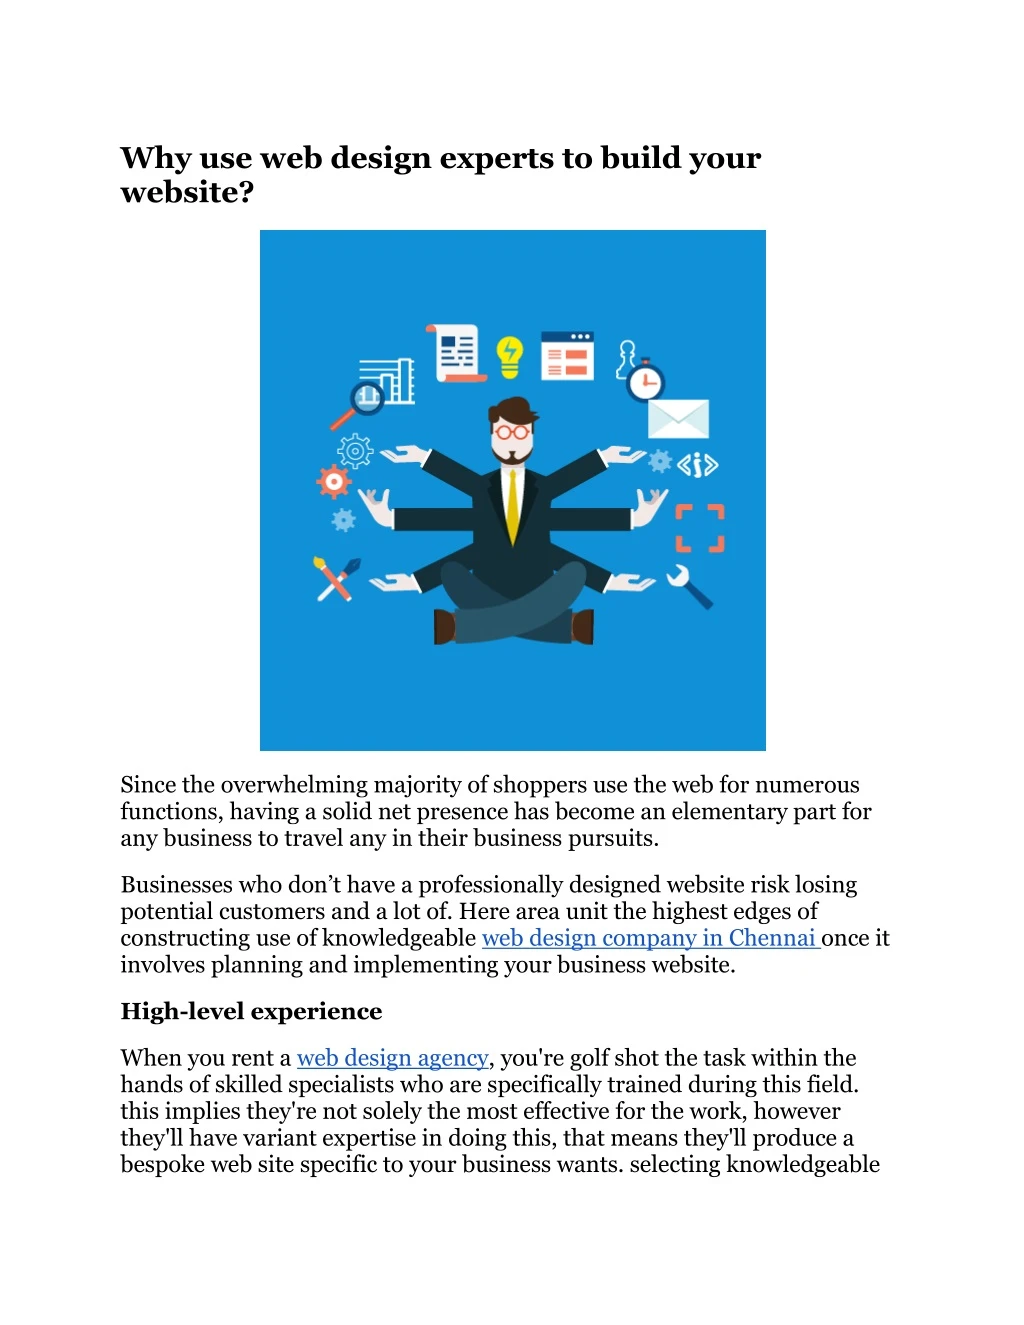 why use web design experts to build your website